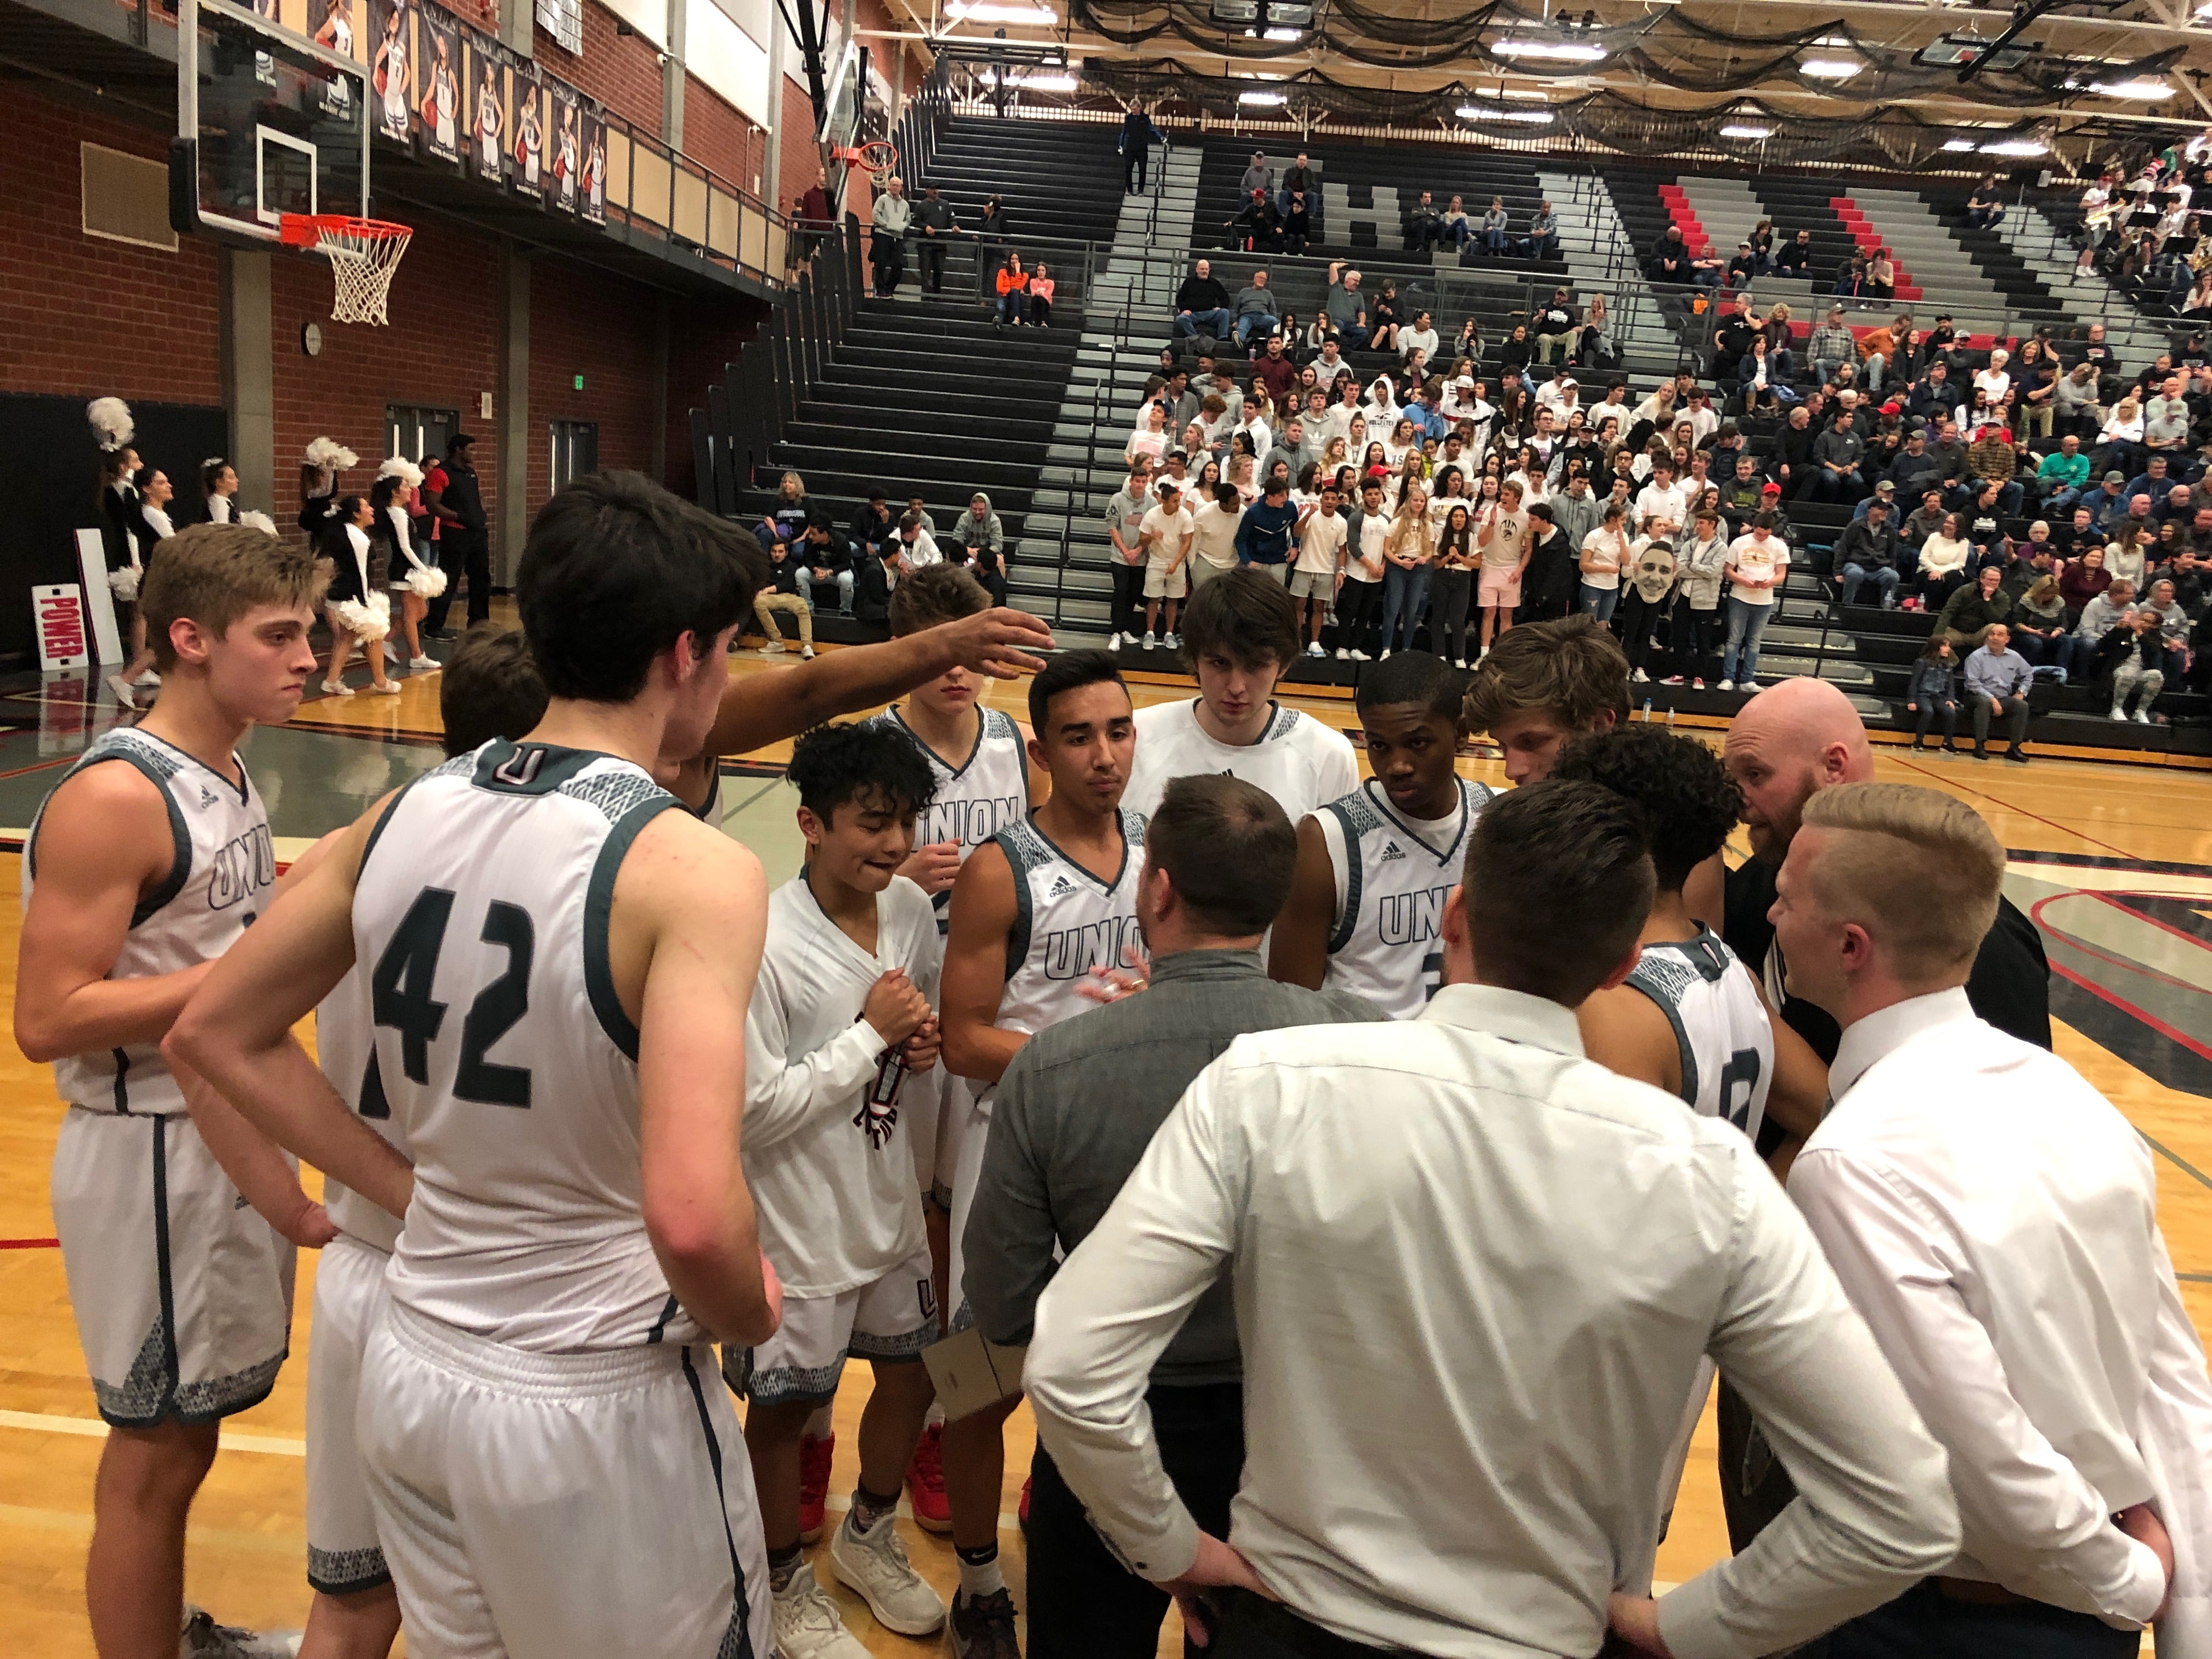 The Union Titans listen to coach Blake Conley in a fourth quarter timeout of a 75-52 win over Sumner in the bi-district playoff on Thursday at Union High School.